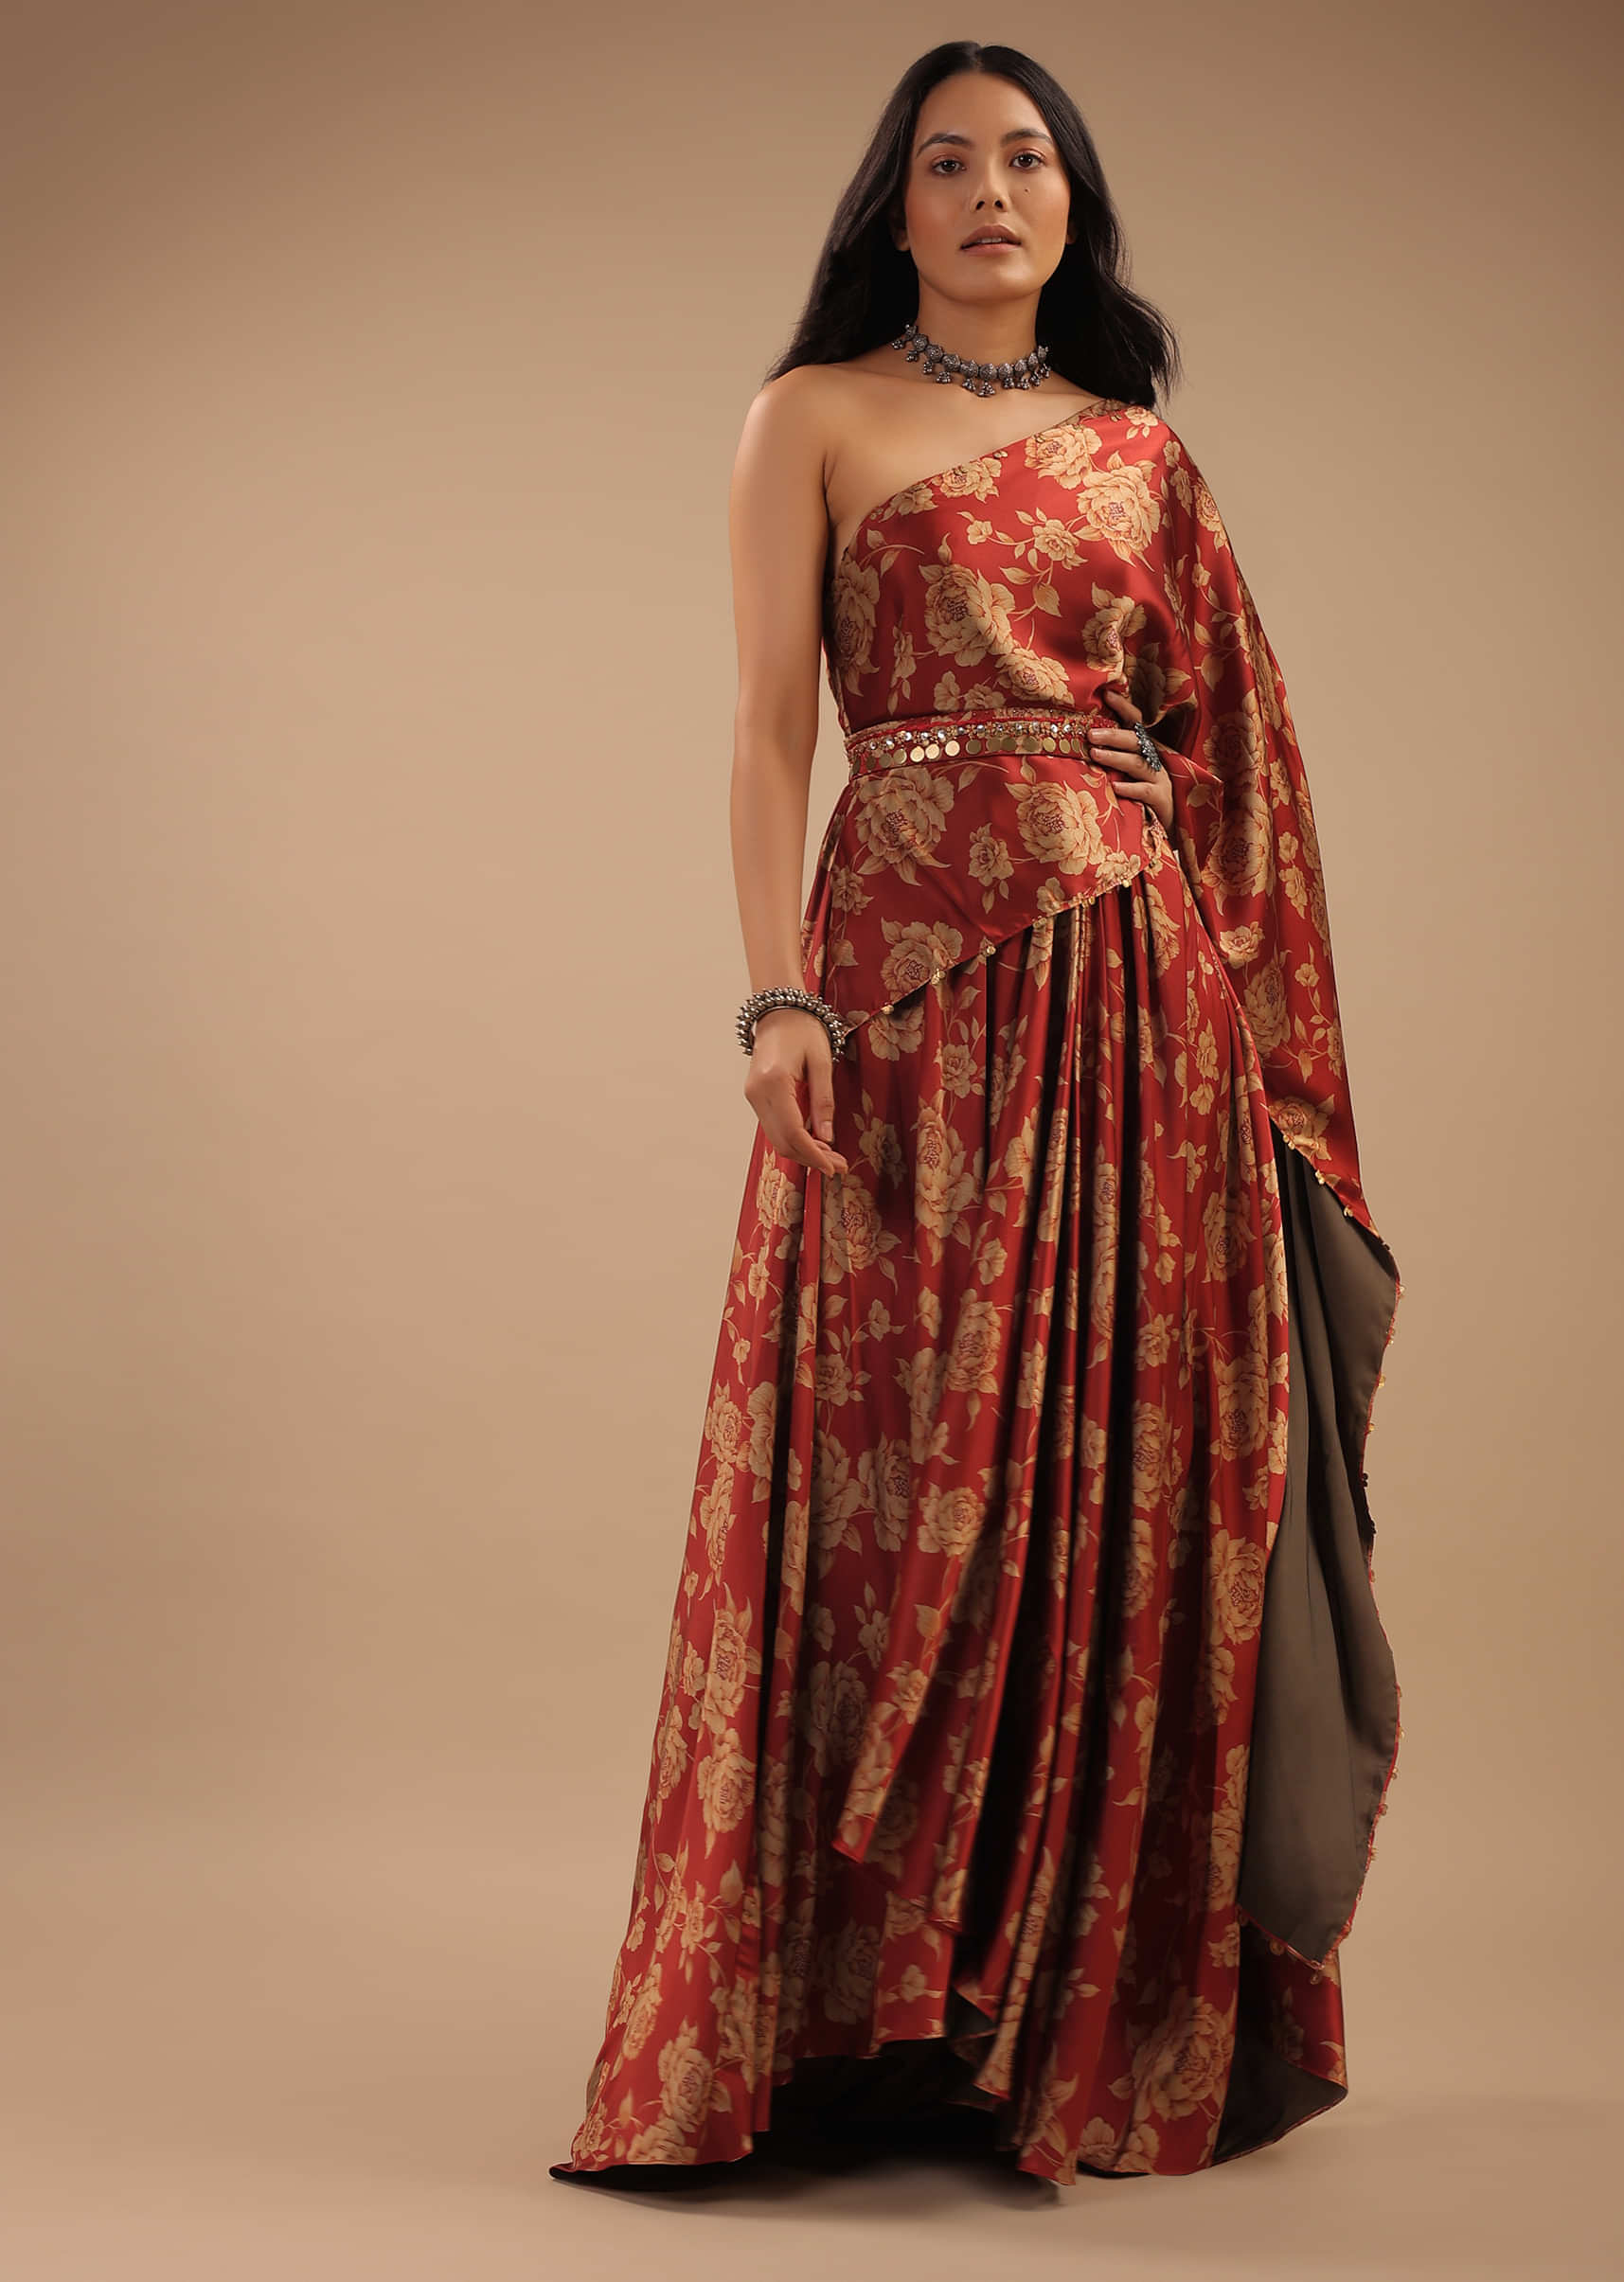 Red Satin One-Shoulder Dress With Floral Print And A Belt To Cinch The Drape